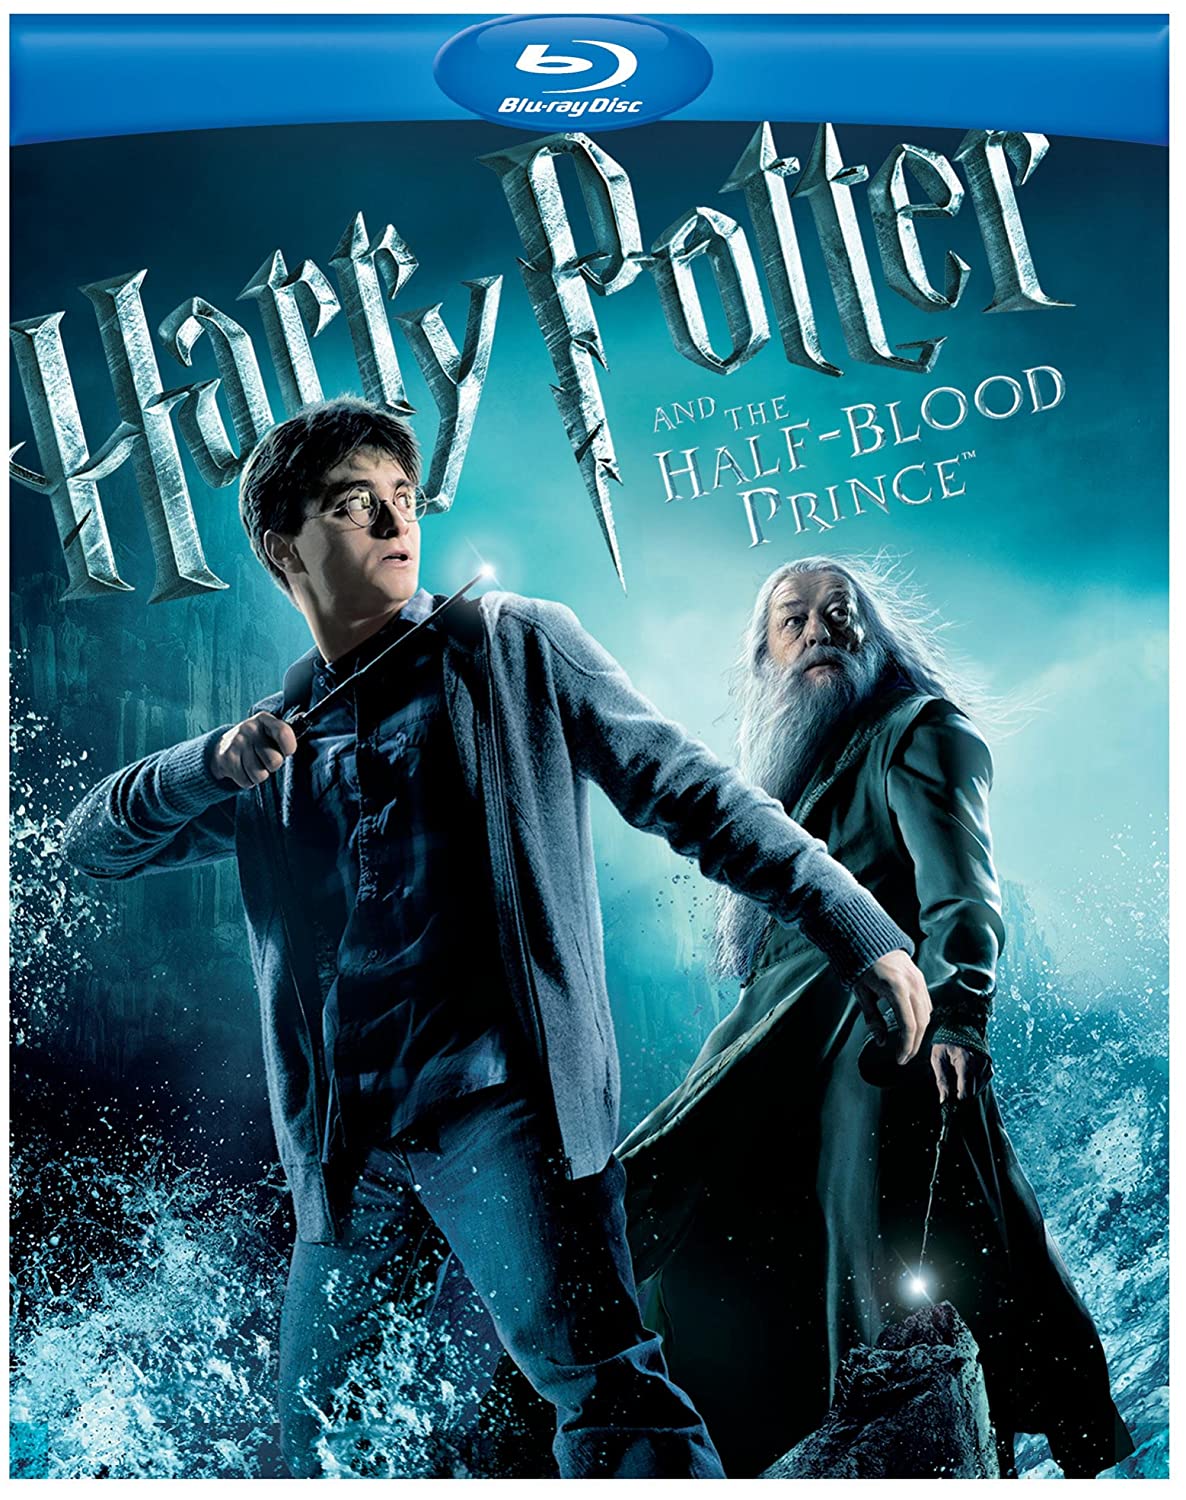 Harry Potter and the Half-Blood Prince - Blu-ray (Used Once)